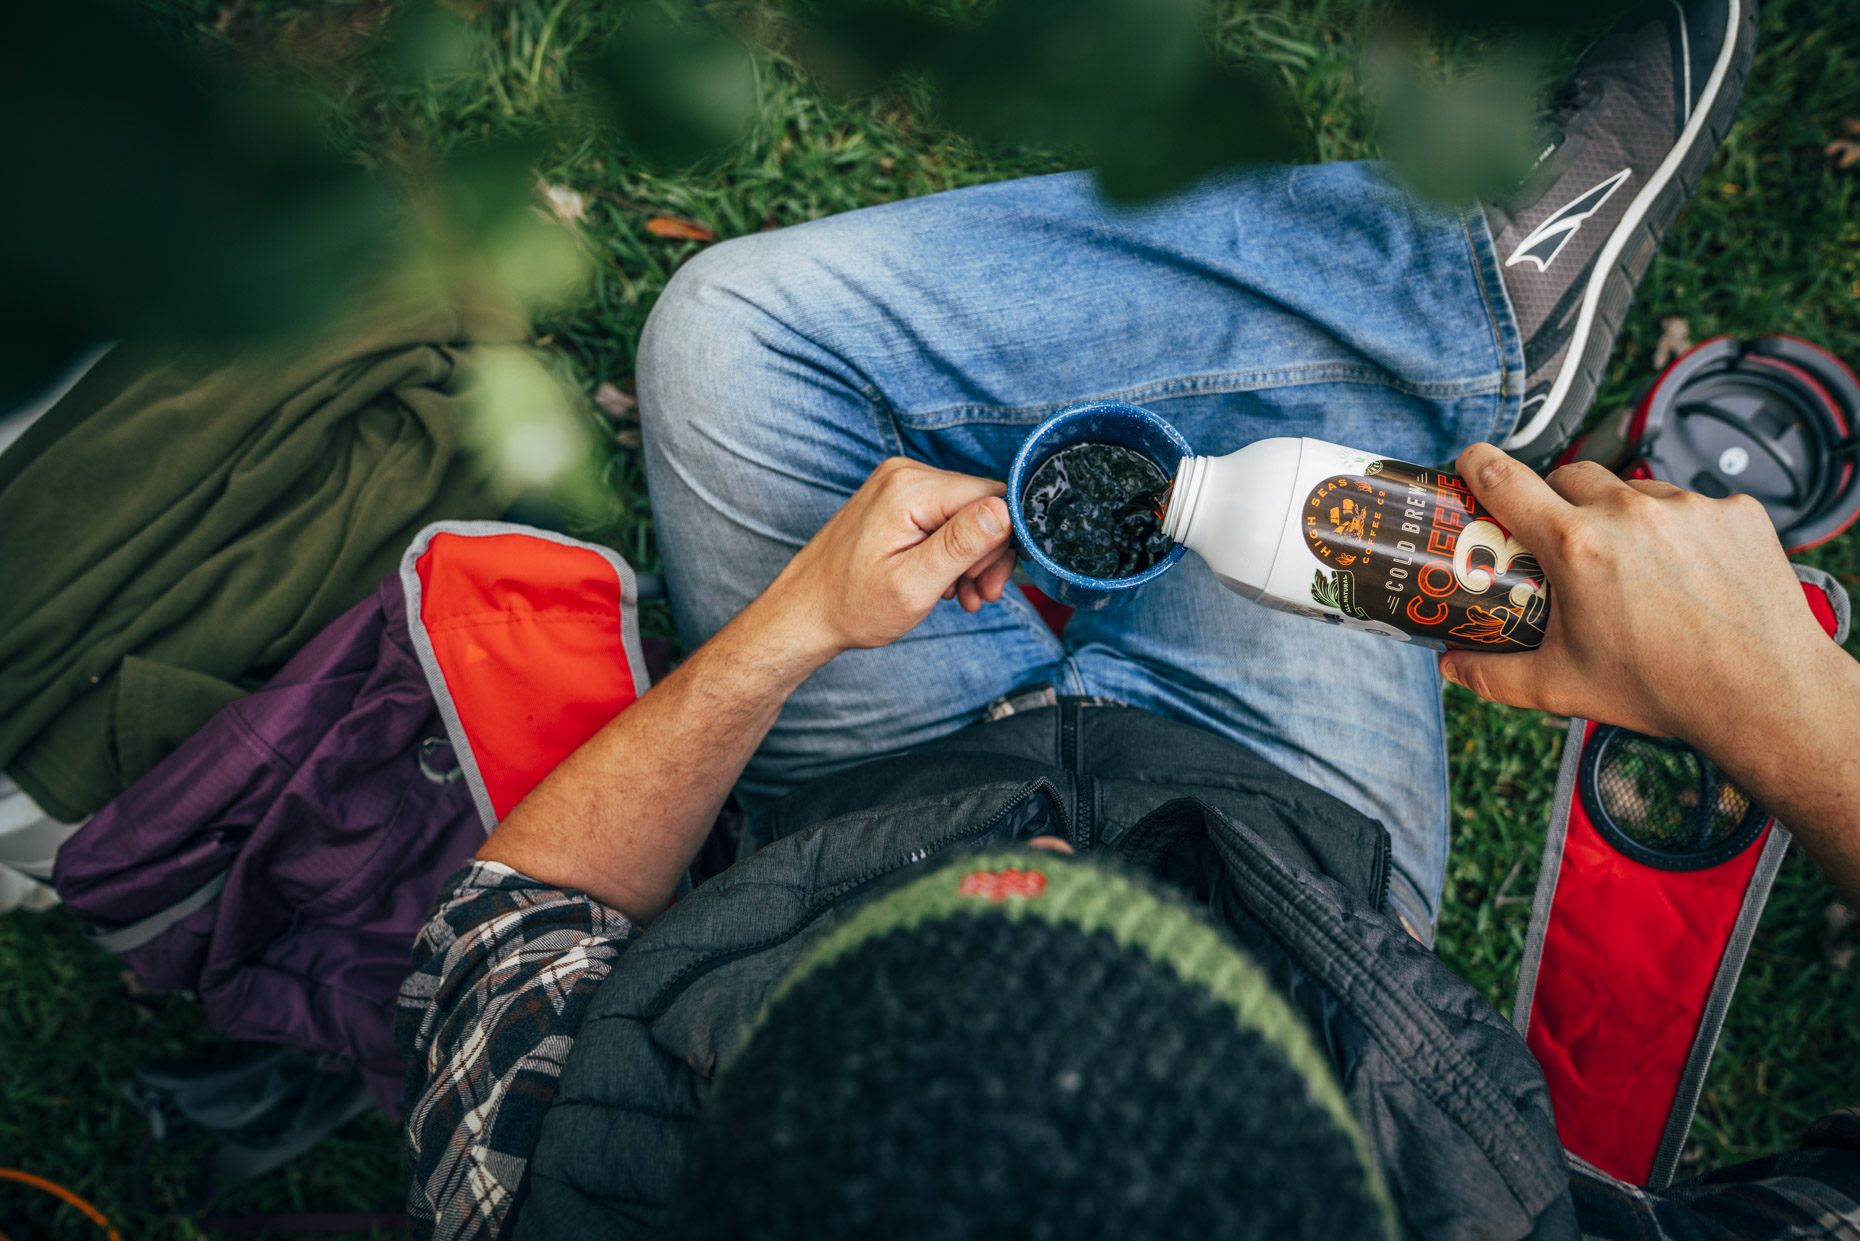 Overhead view of man pouring coffee into mug while camping